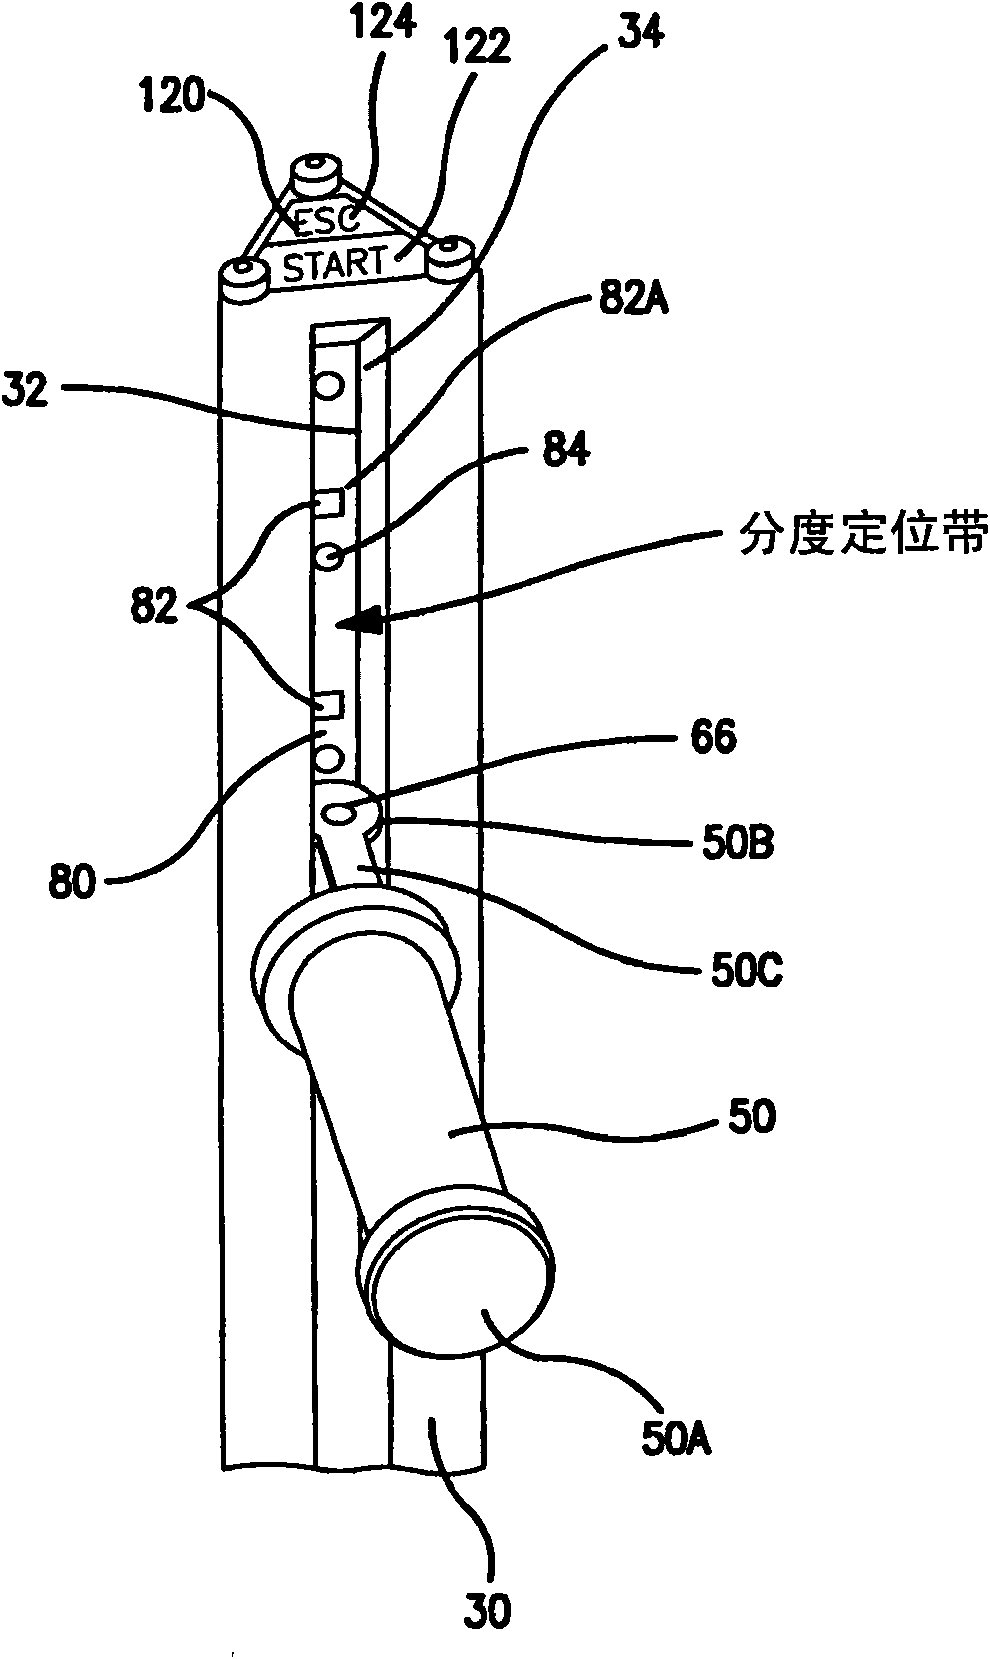 Nuclear gauges and methods of configuration and calibration of nuclear gauges